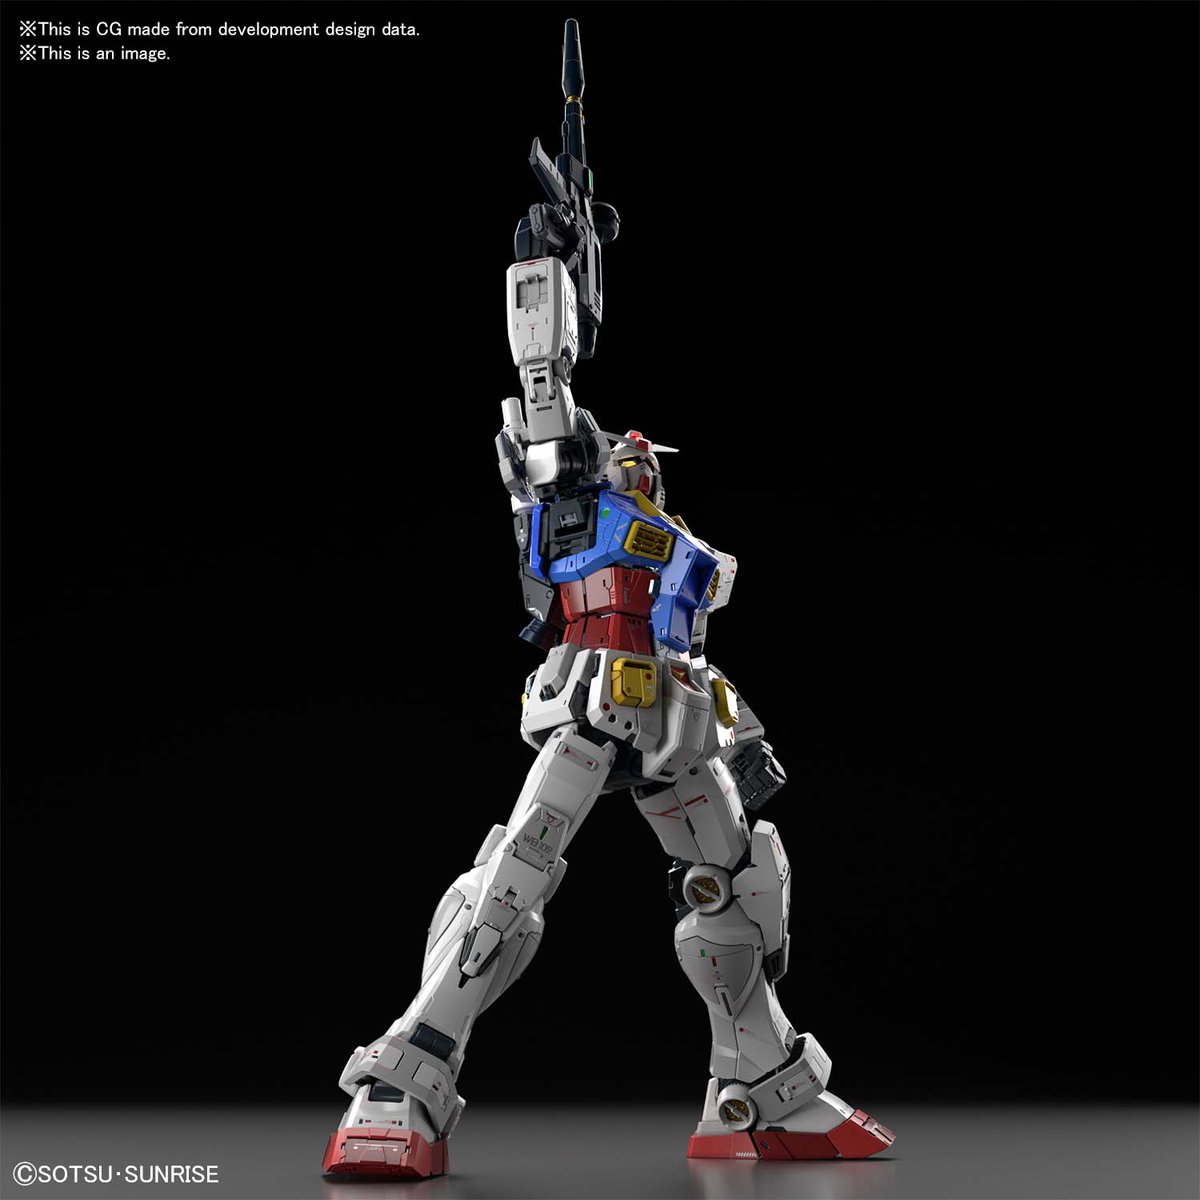 Bluefin Brands The Rx 78 2 Gundam Mobile Suit Gundam Bandai Pg Unleashed 1 60 Msrp Is 295 We Will Not Have It On Our Site Limited Quantities Will Be Available At Hobby